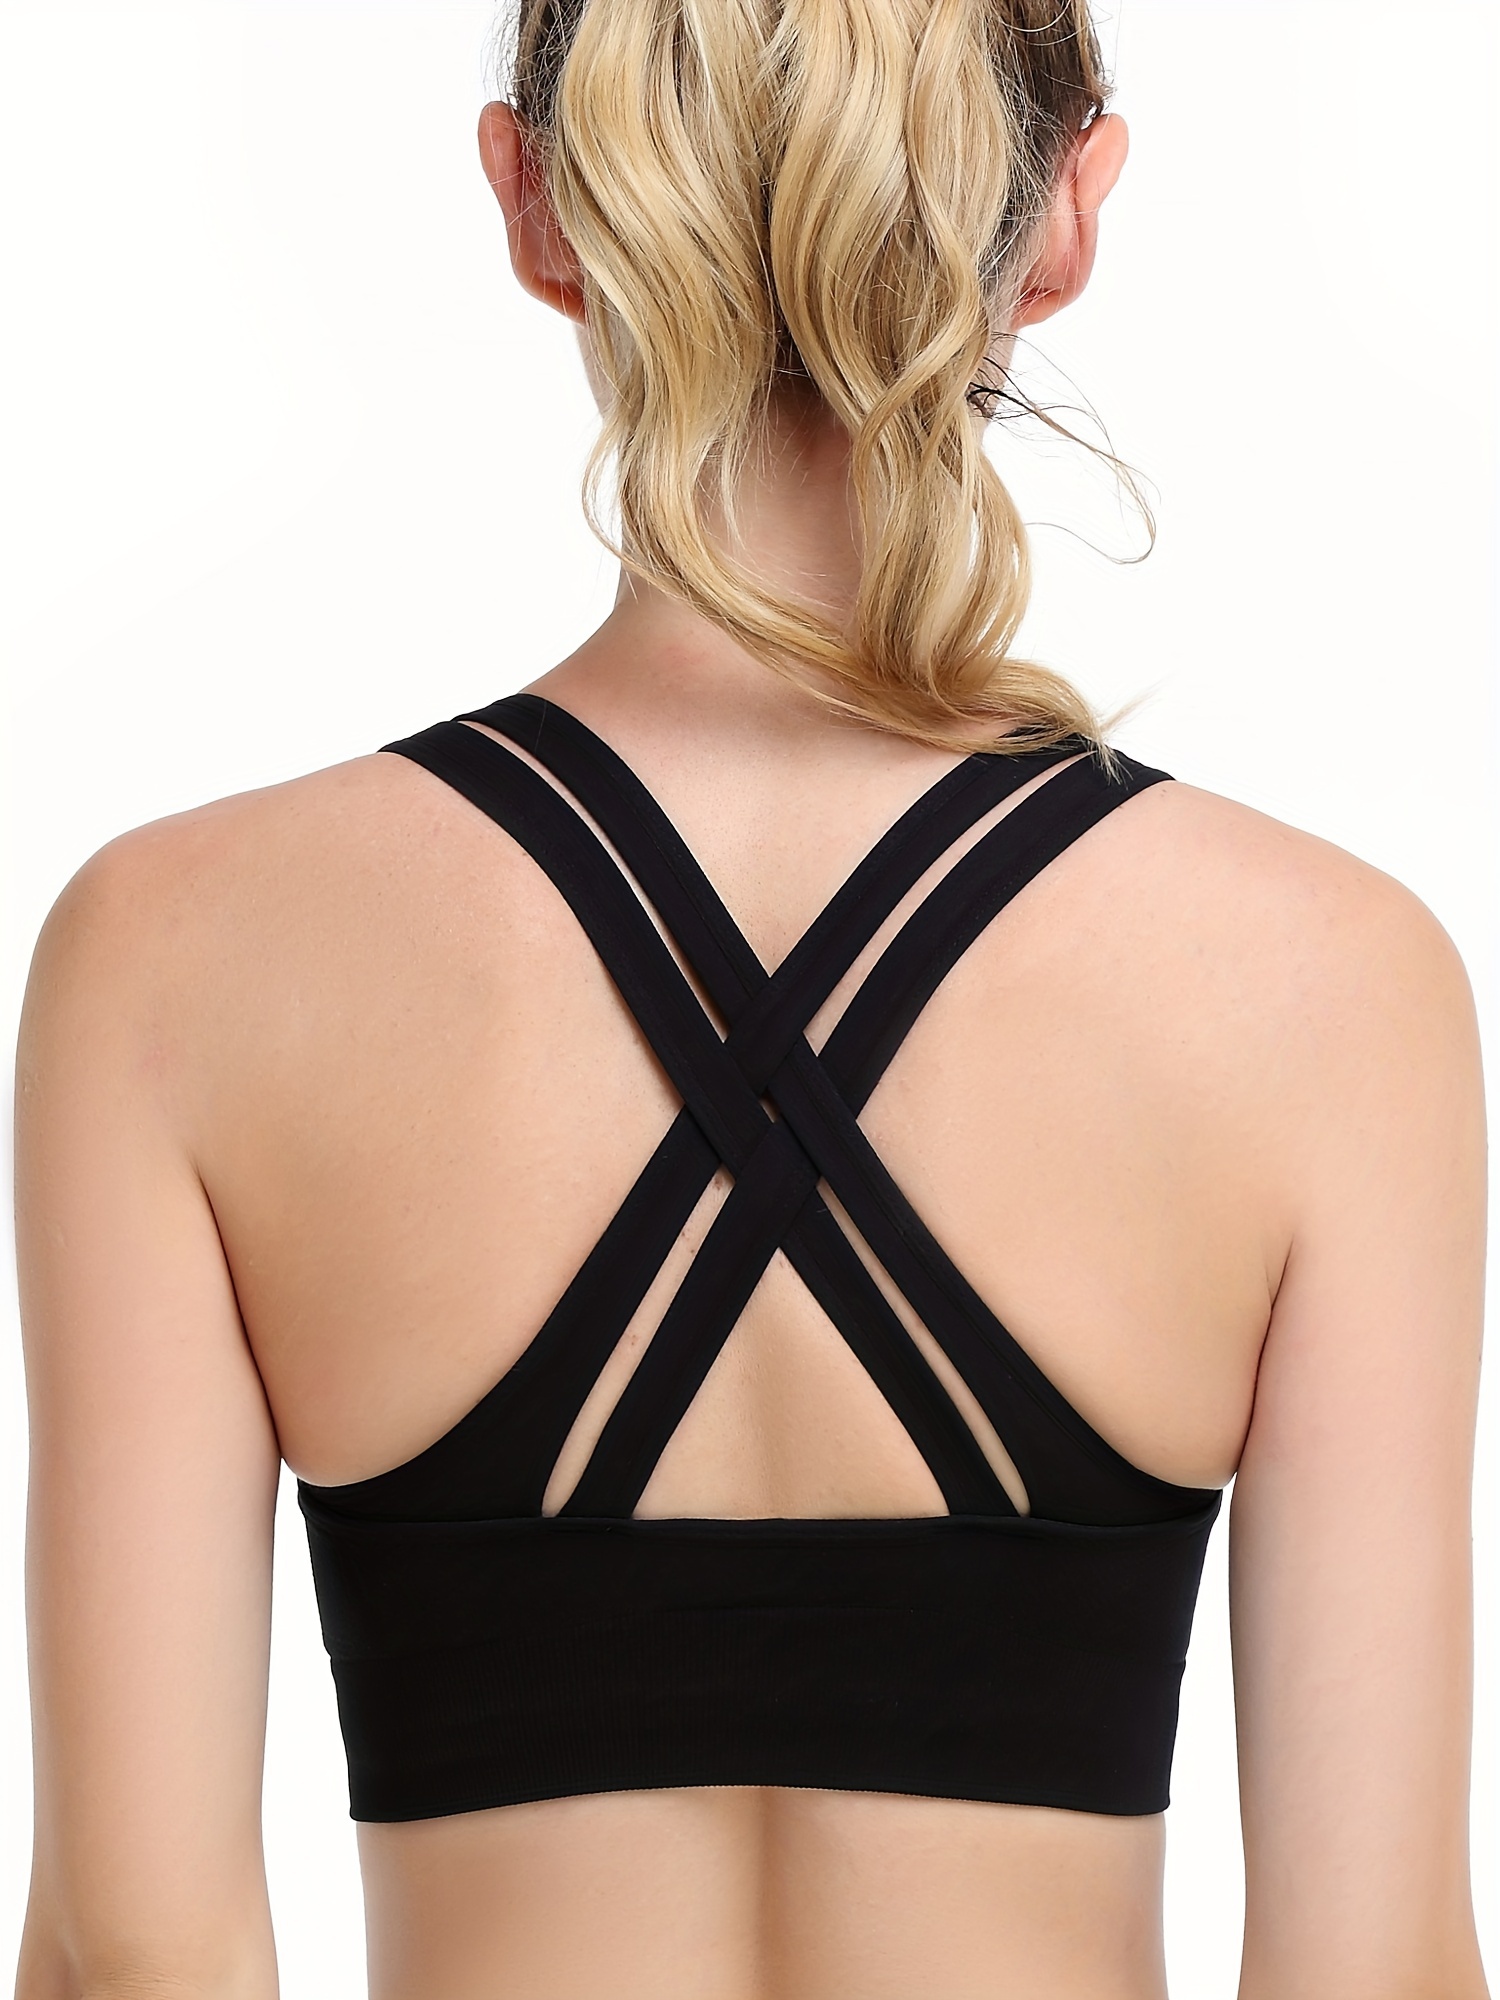 Minimalist Backless Yoga Bra With Backless Design And Thin